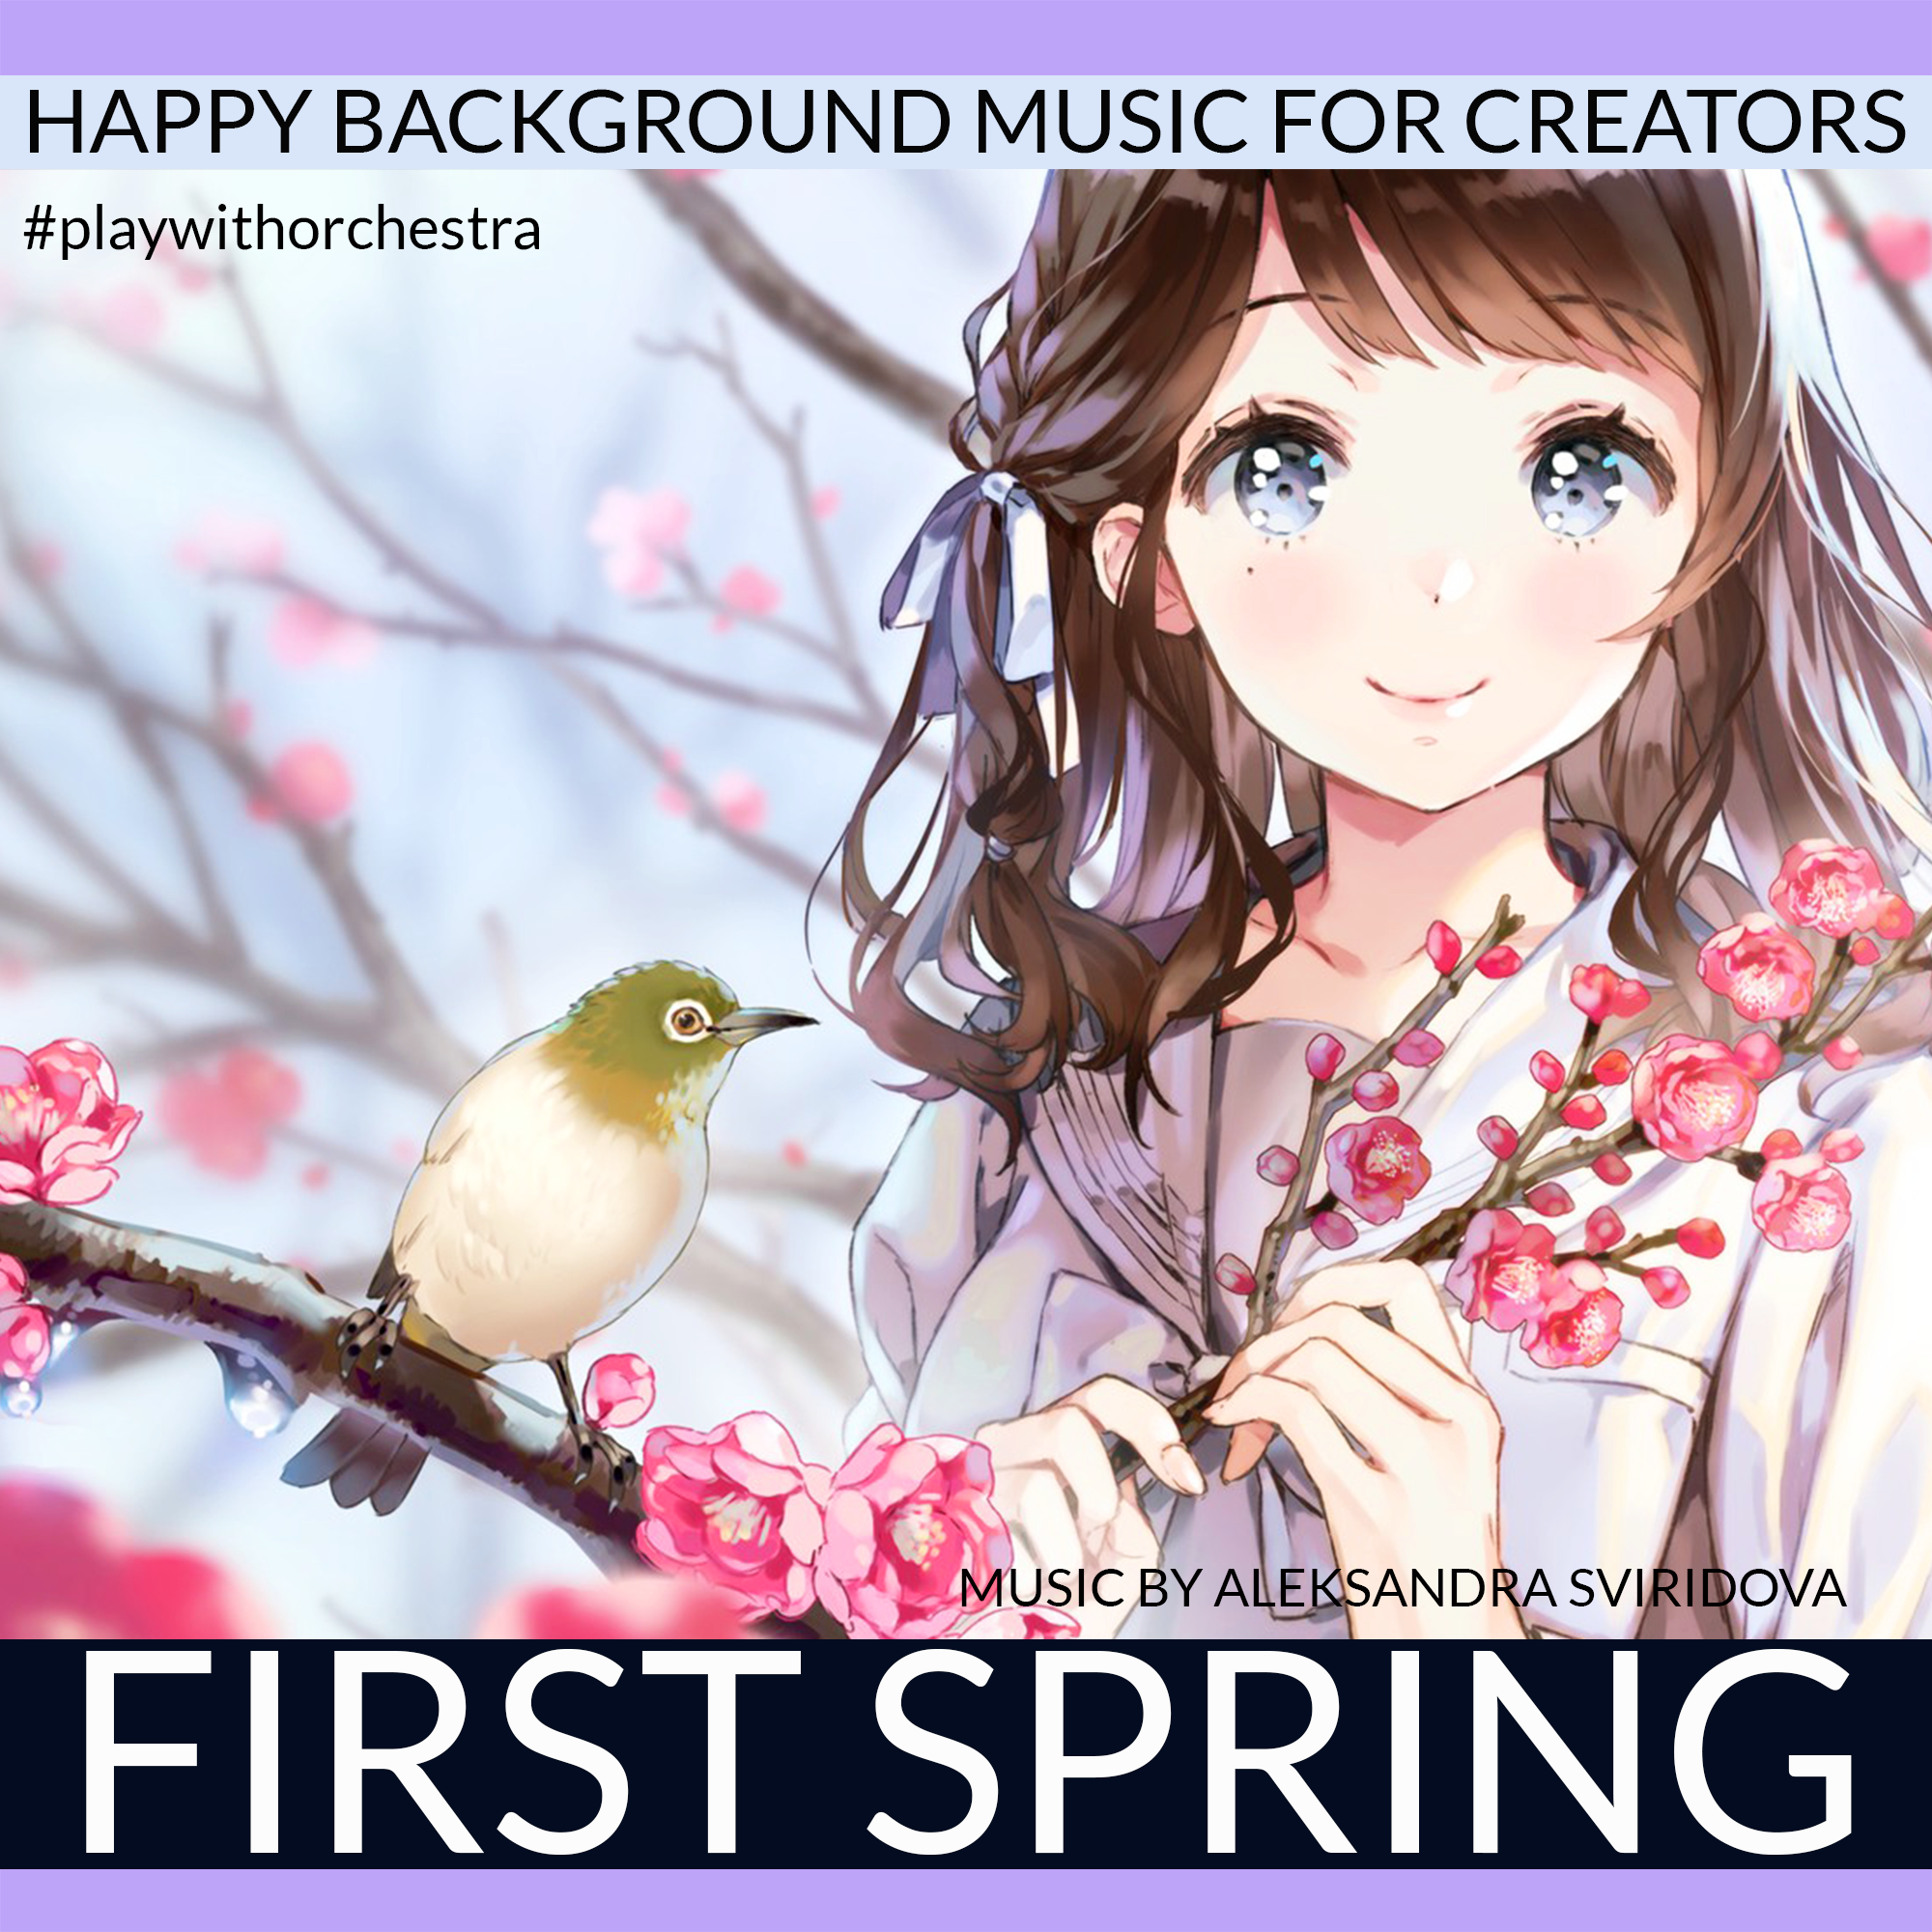 Happy No Copyright Background Music | Royalty Free Music for Creators with  FREE DOWNLOAD - Play with Orchestra